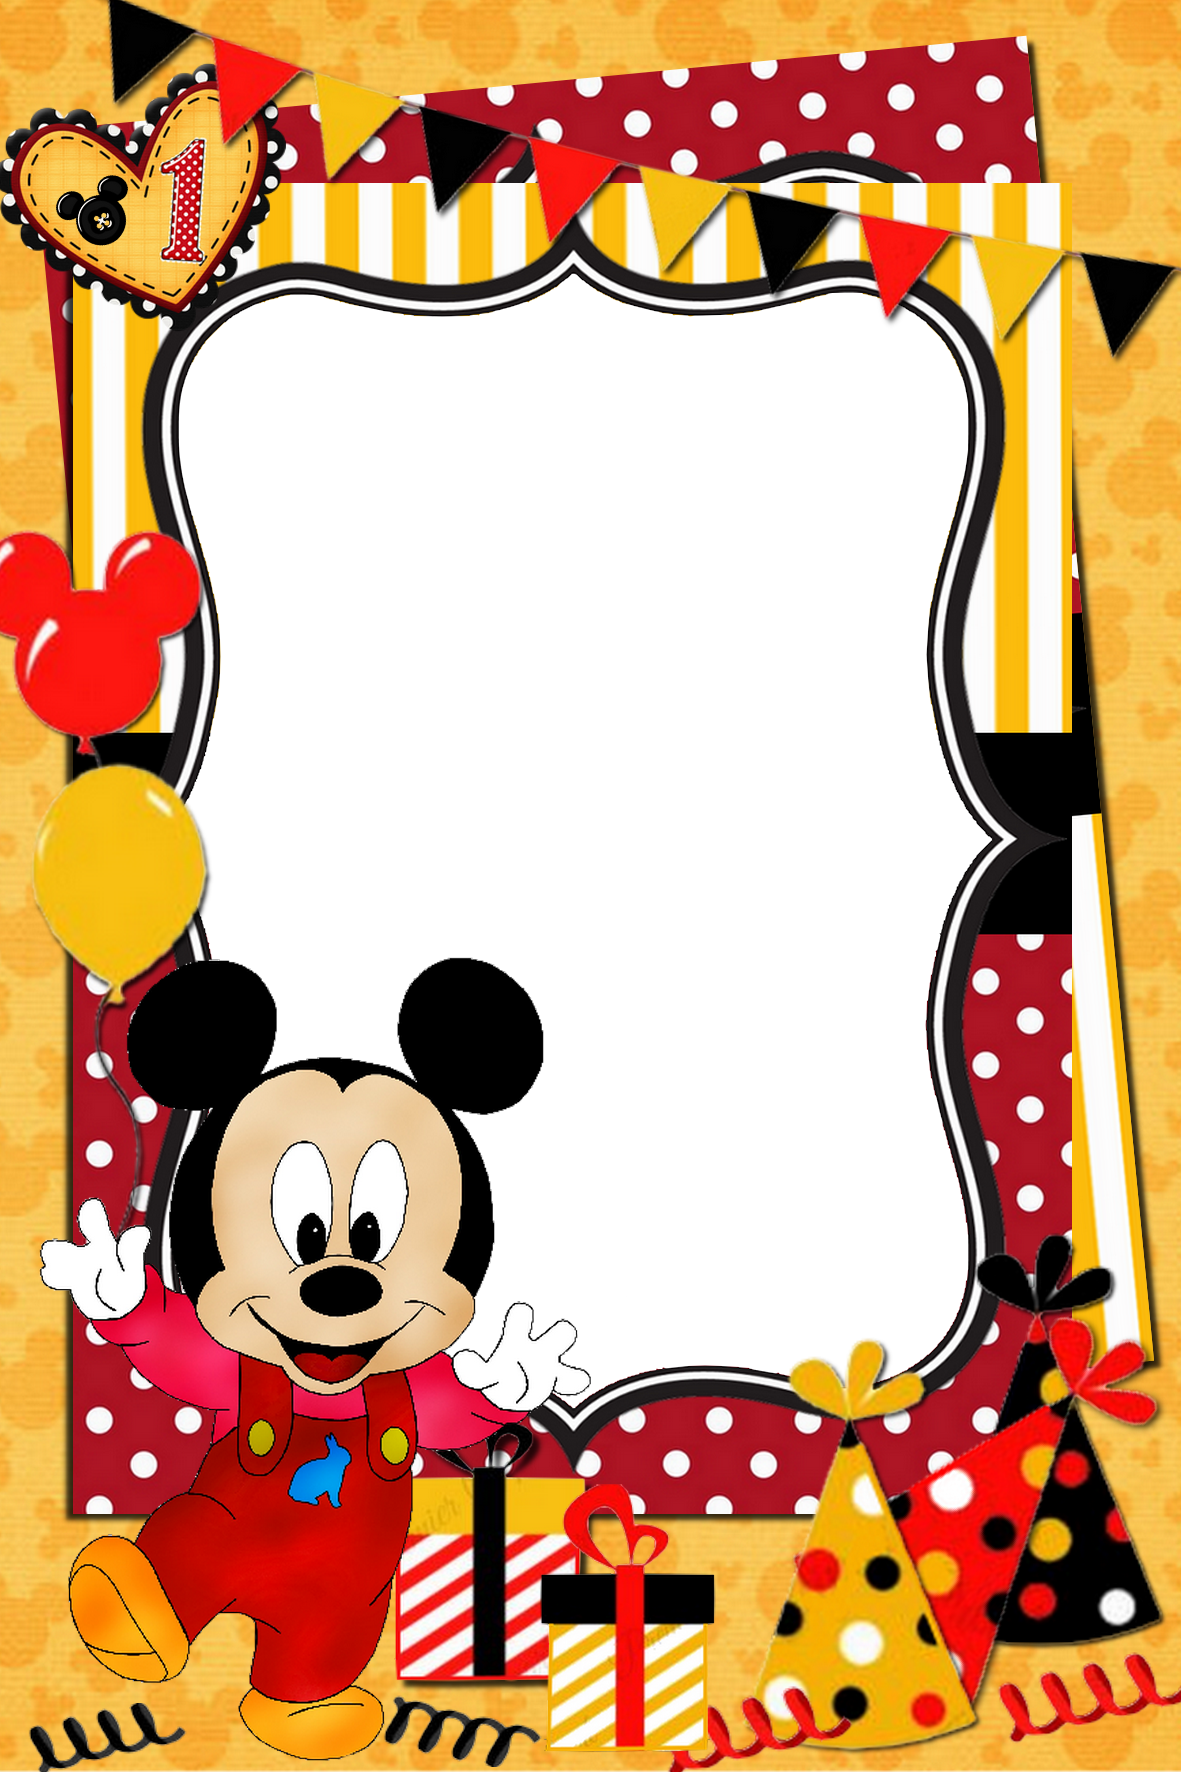 Download PNG image - Mickey Mouse Frame Transparent PNG 